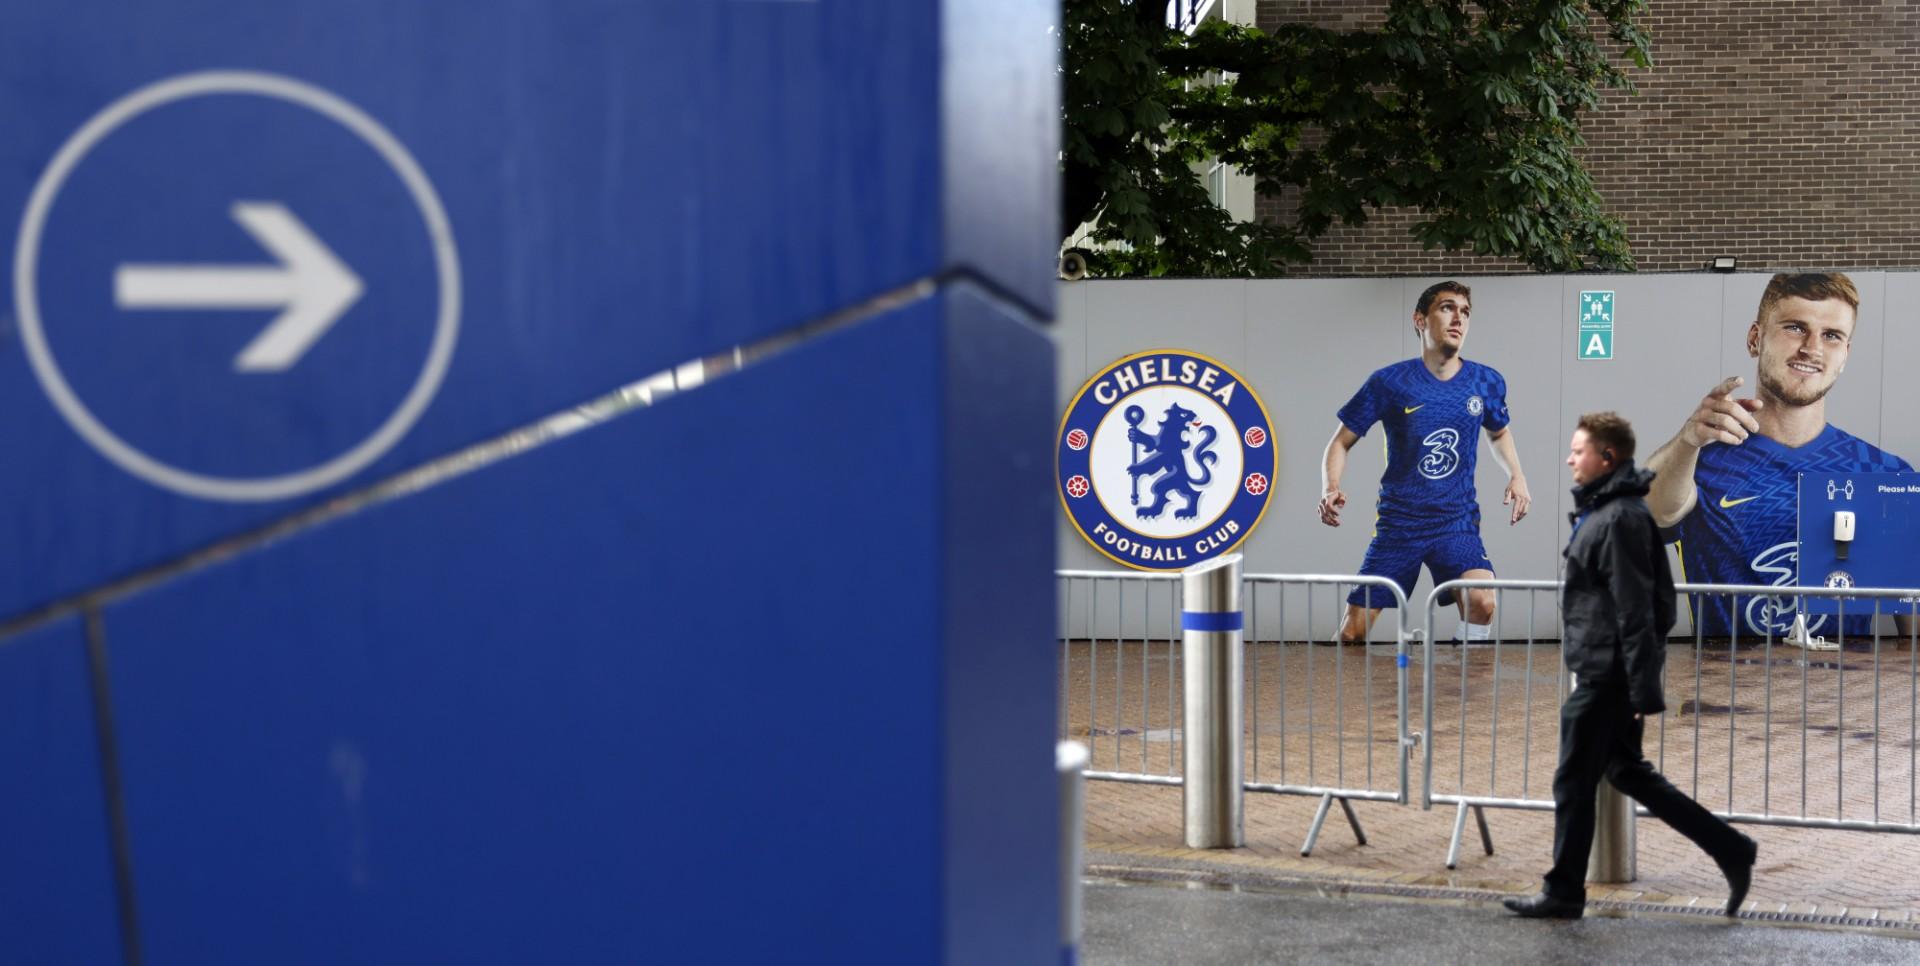 A pedestrian walks outside Stamford Bridge, home ground of Chelsea football club, in London on May 24. Photo: AFP